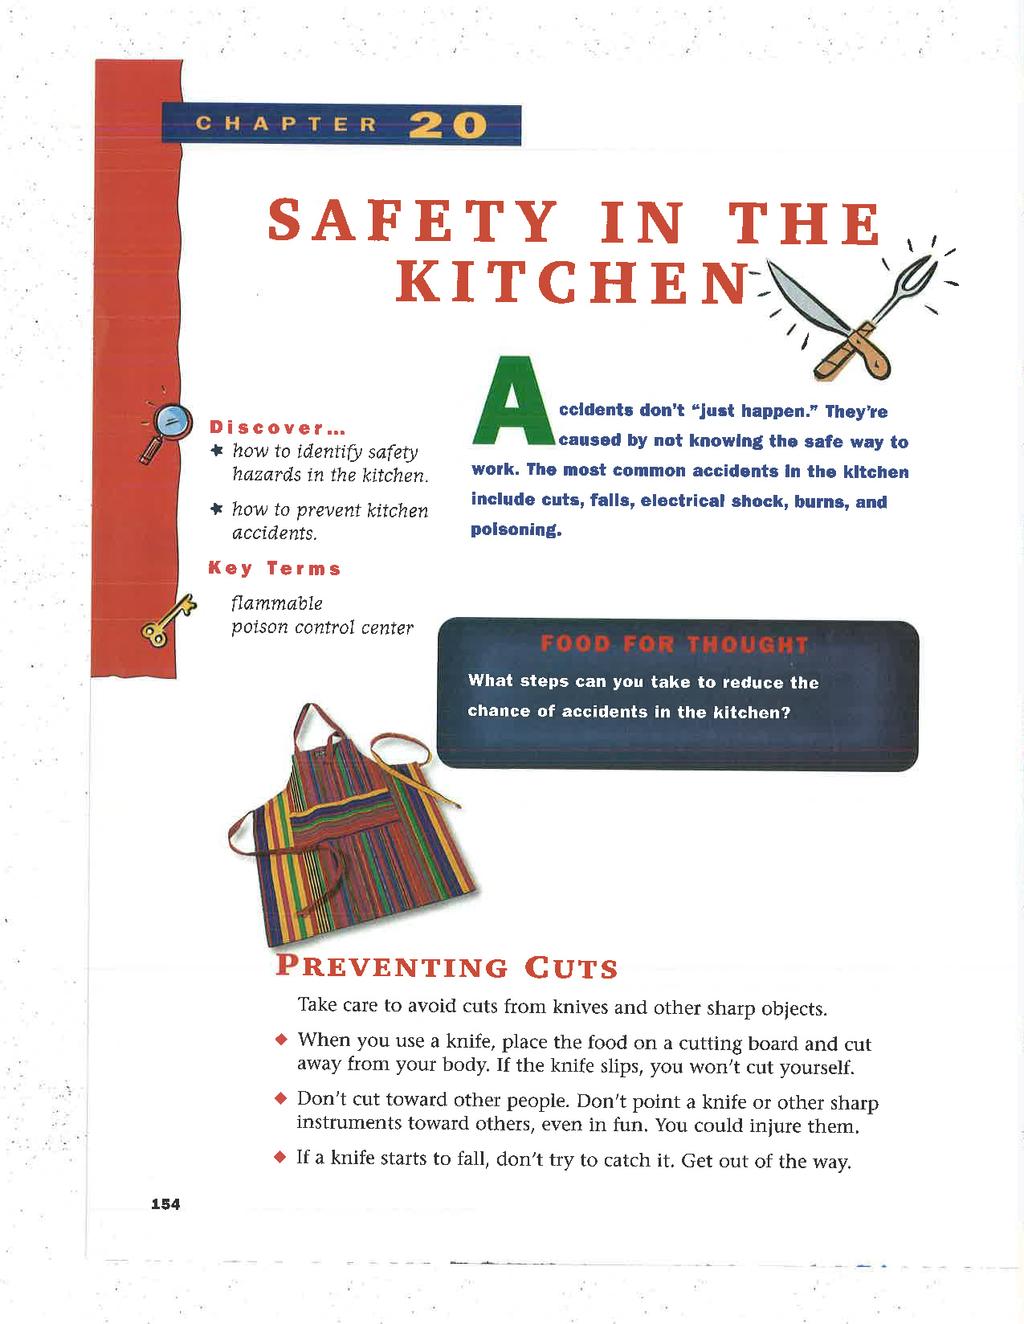 SAFETY IN THE KITCHEN-- Discover... how to identify safety hazards in the kitchen. how to prevent kitchen accidents. Key Terms flammable poison control center A ccldento don't just happen.